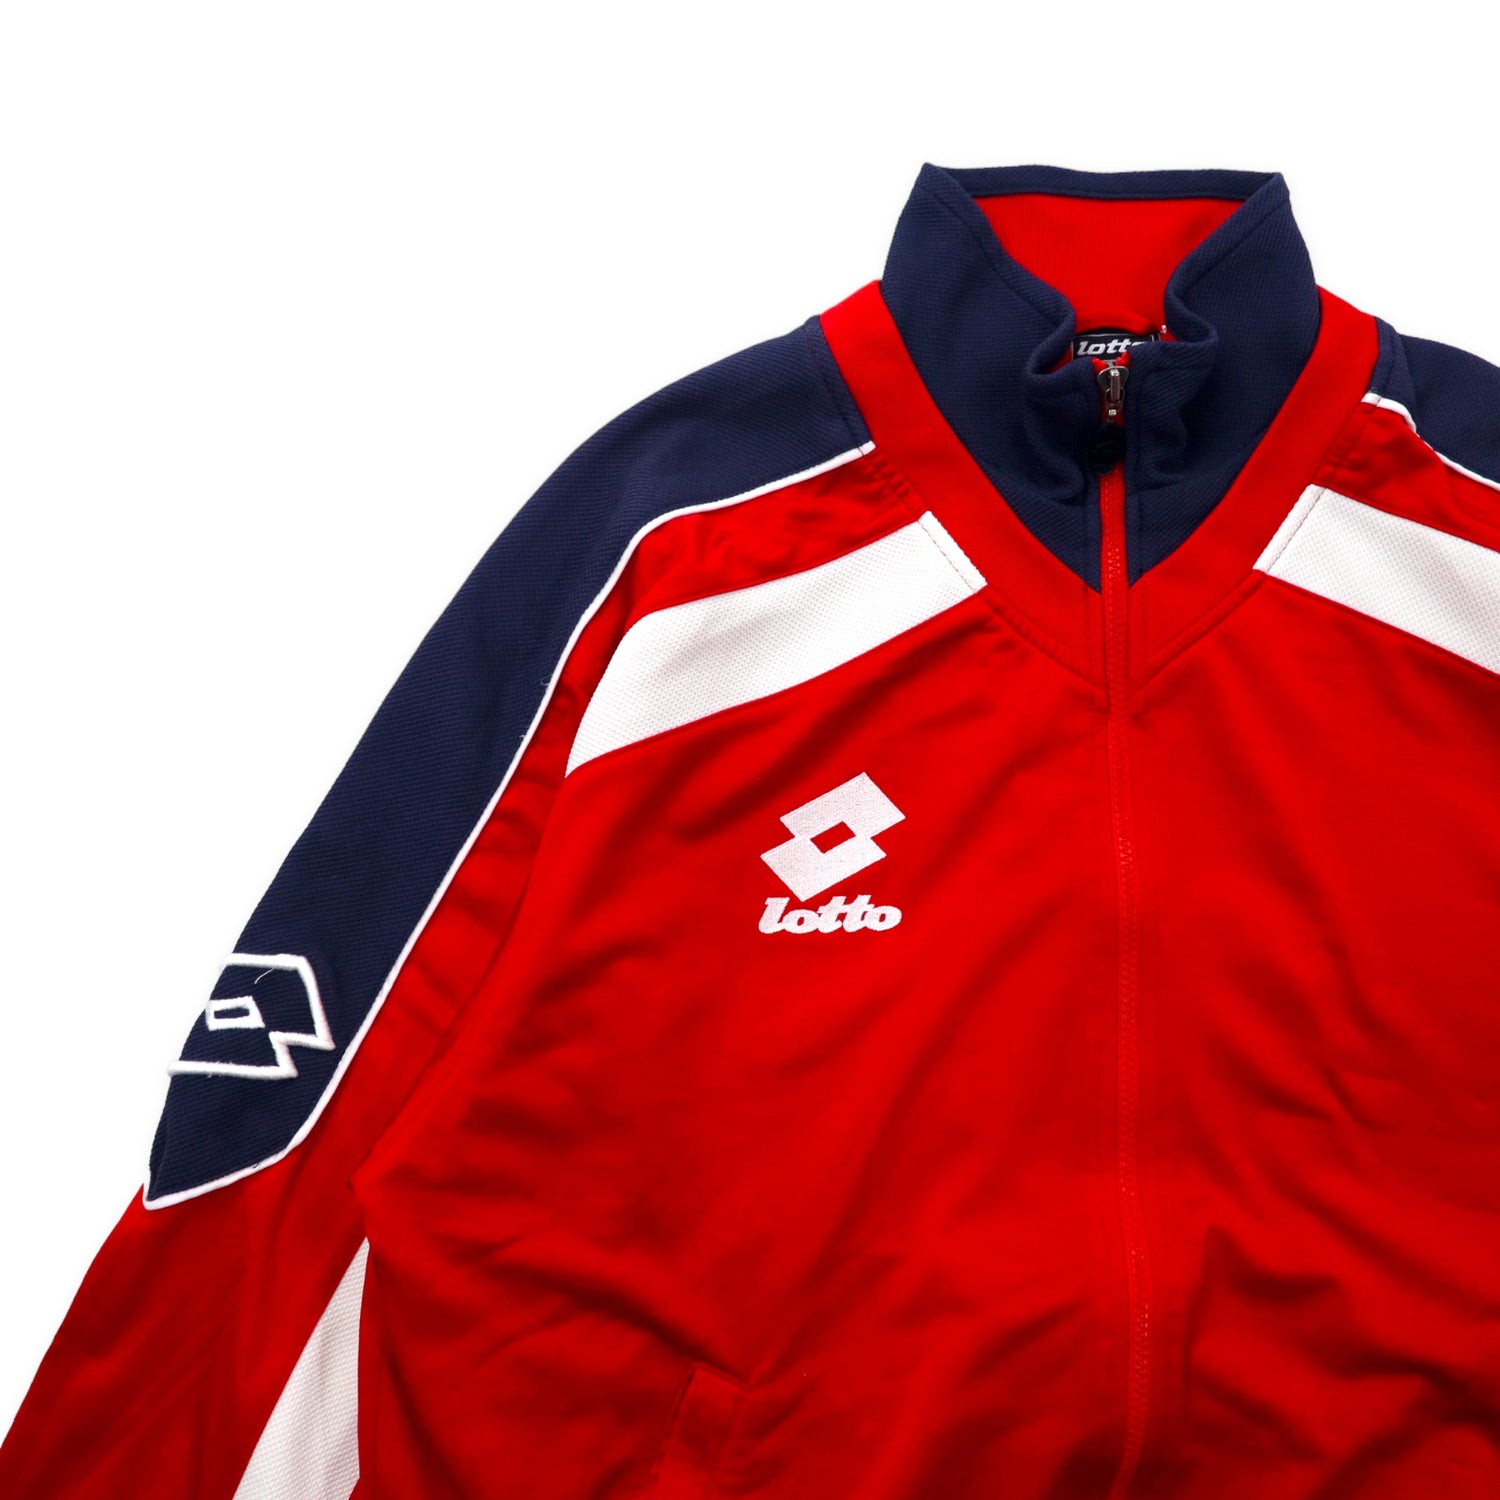 Lotto 90's TRACK JACKET Jersey XL Red polyester logo